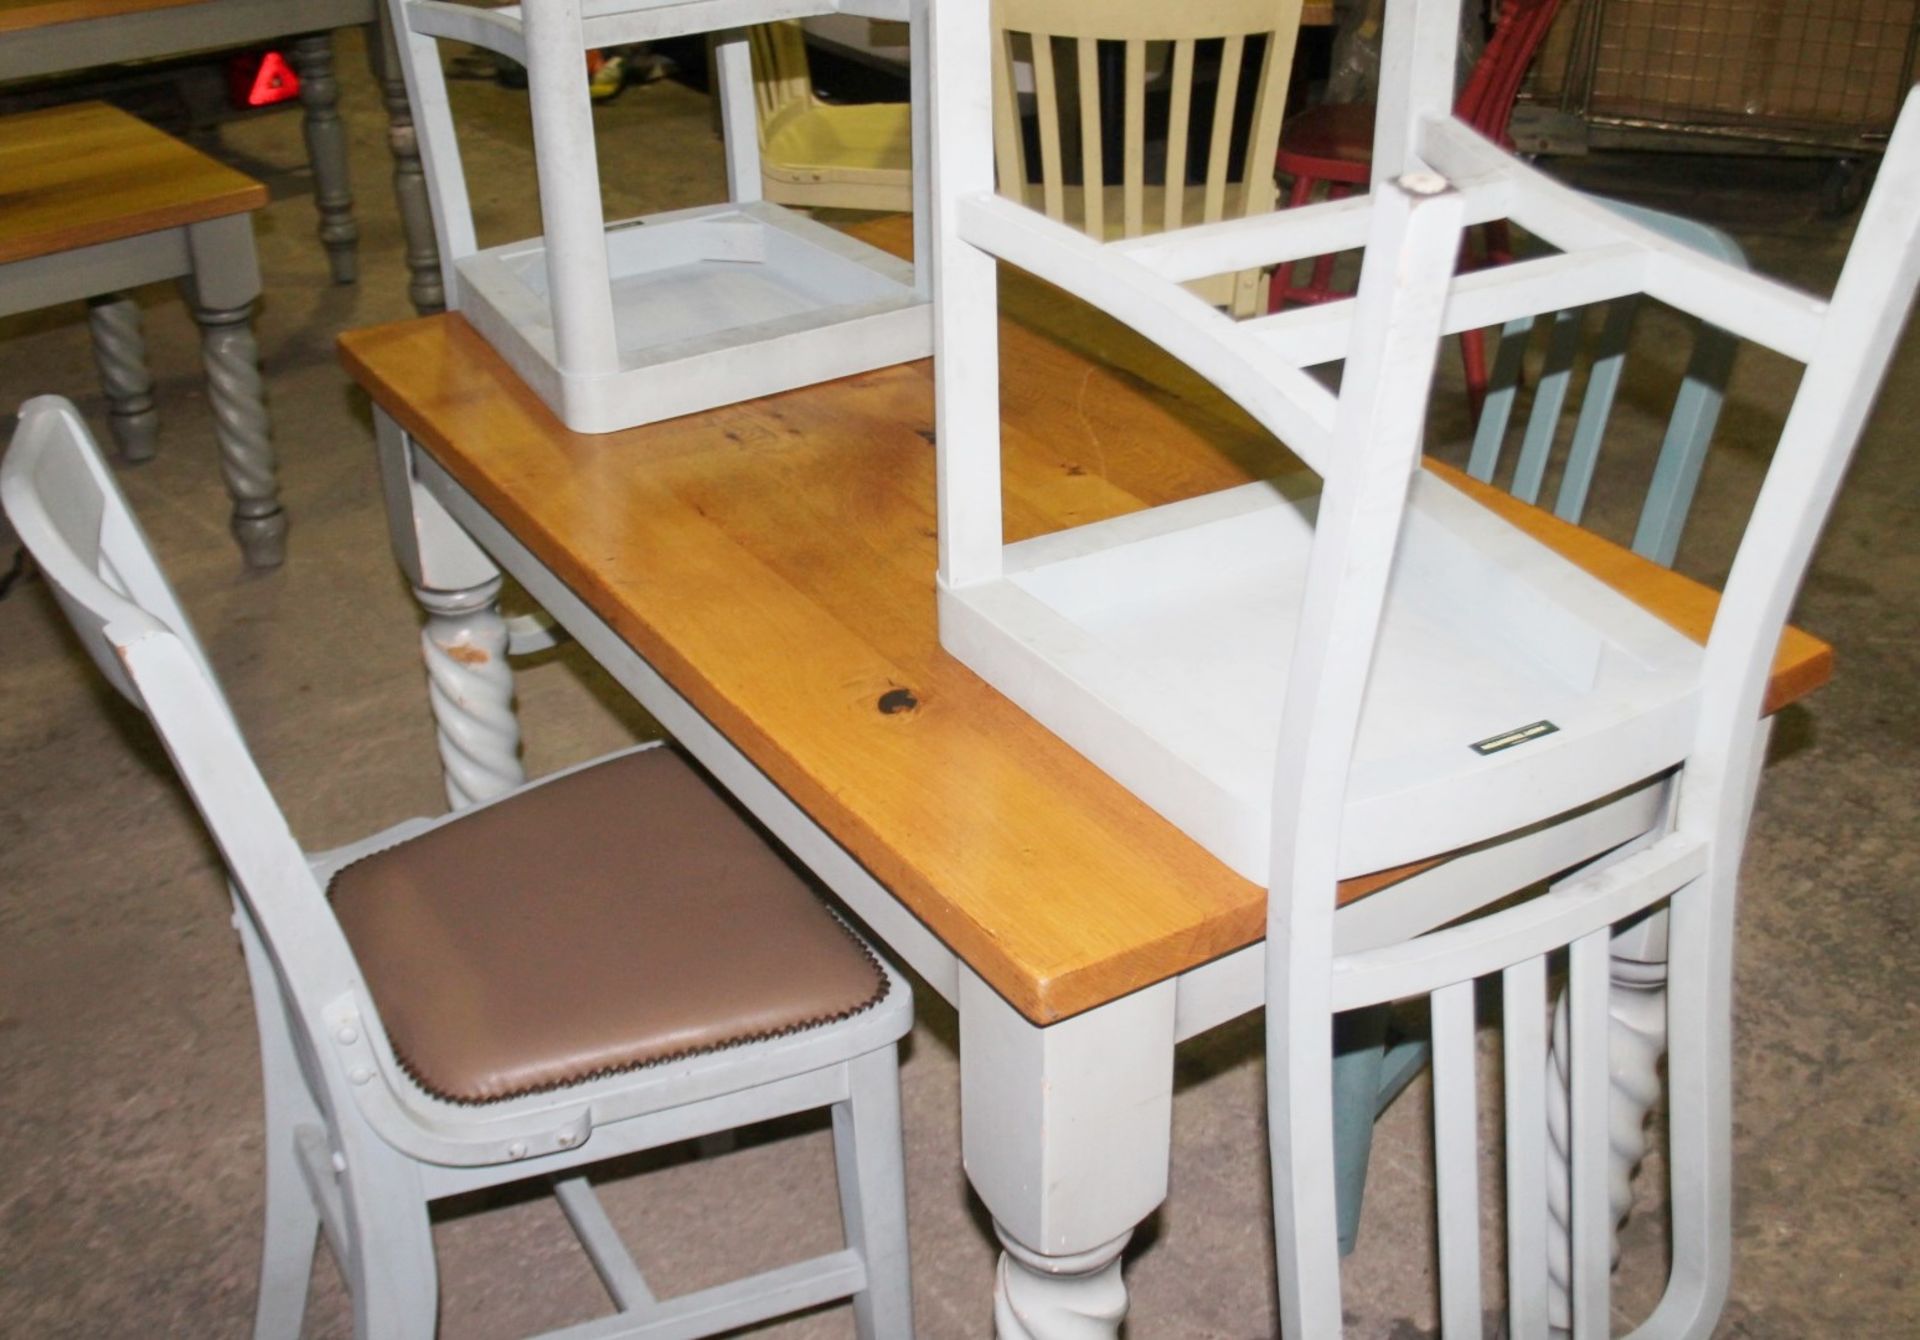 1 x Solid Wood Bistro Table With Turned Legs 4 x Mix-matched Chairs - Image 2 of 4